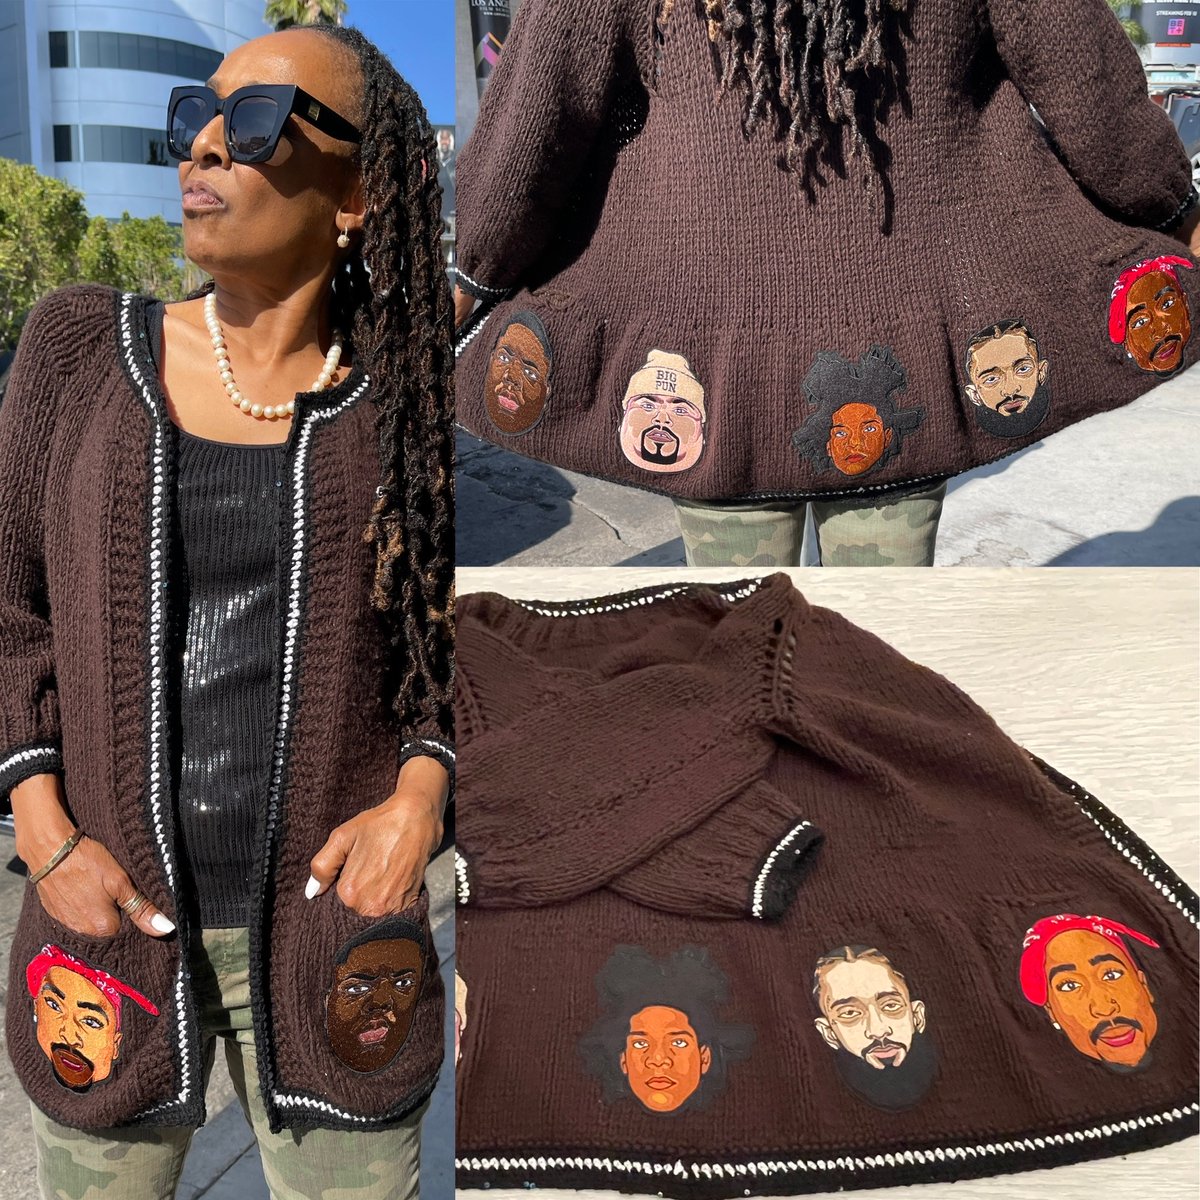 .#Knitting is my passion! My latest #siedahcreations is a hand-knitted & crocheted cashmere sweater paying homage to these deceased giants of black culture, #tupacshakur, #notoriousbig, #bigpun, #nipseyhustle & #jeanmichelbasquiat.
I call it my R. I.P. (rap, ink, paint) cardigan.